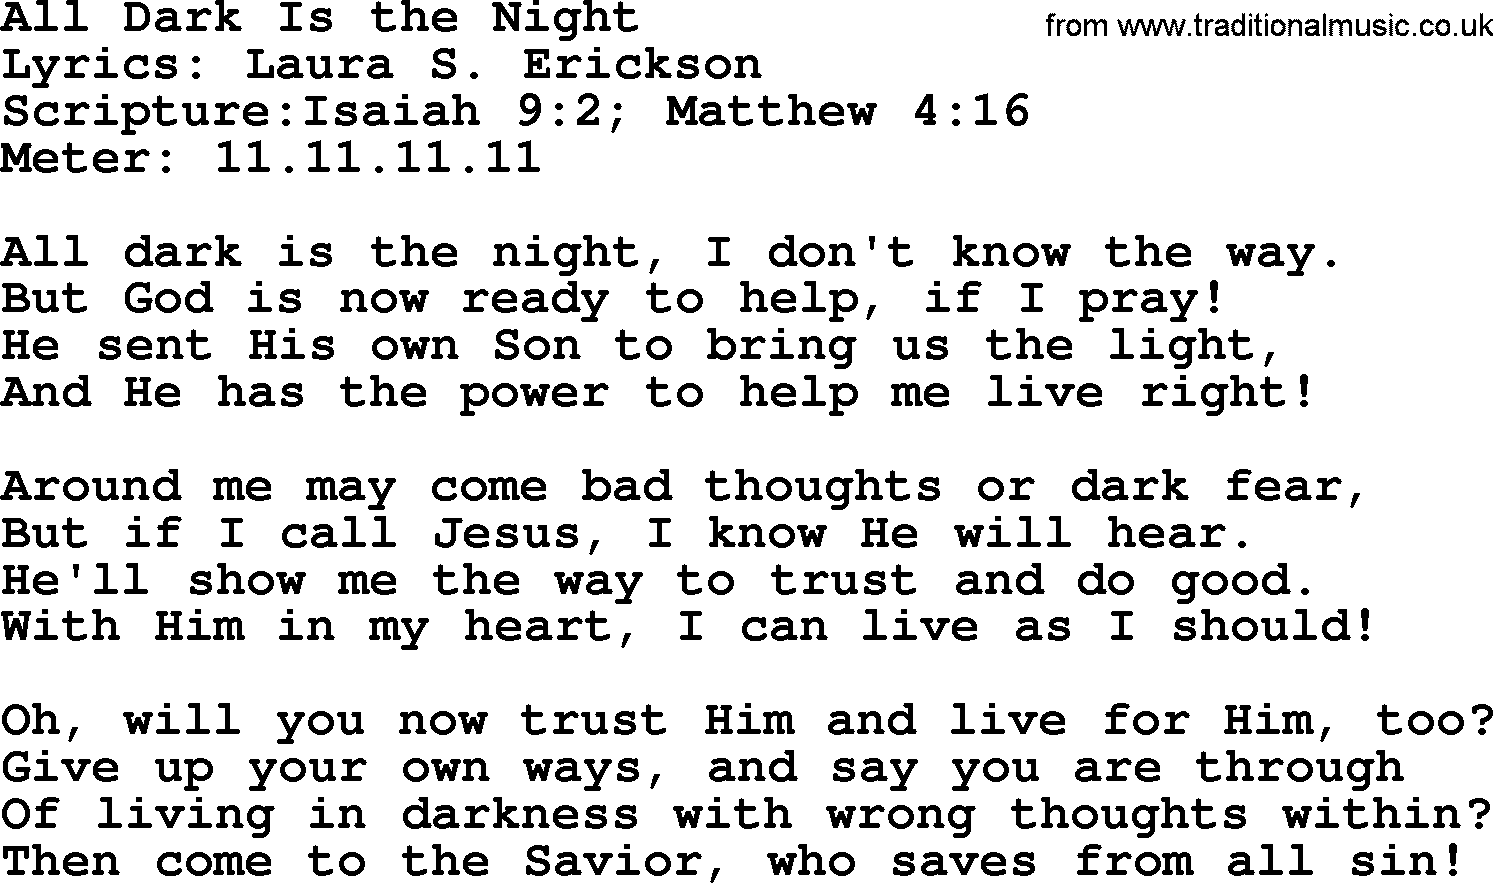 Hymns about  Angels, Hymn: All Dark Is the Night, lyrics, sheet music, midi & Mp3 music with PDF